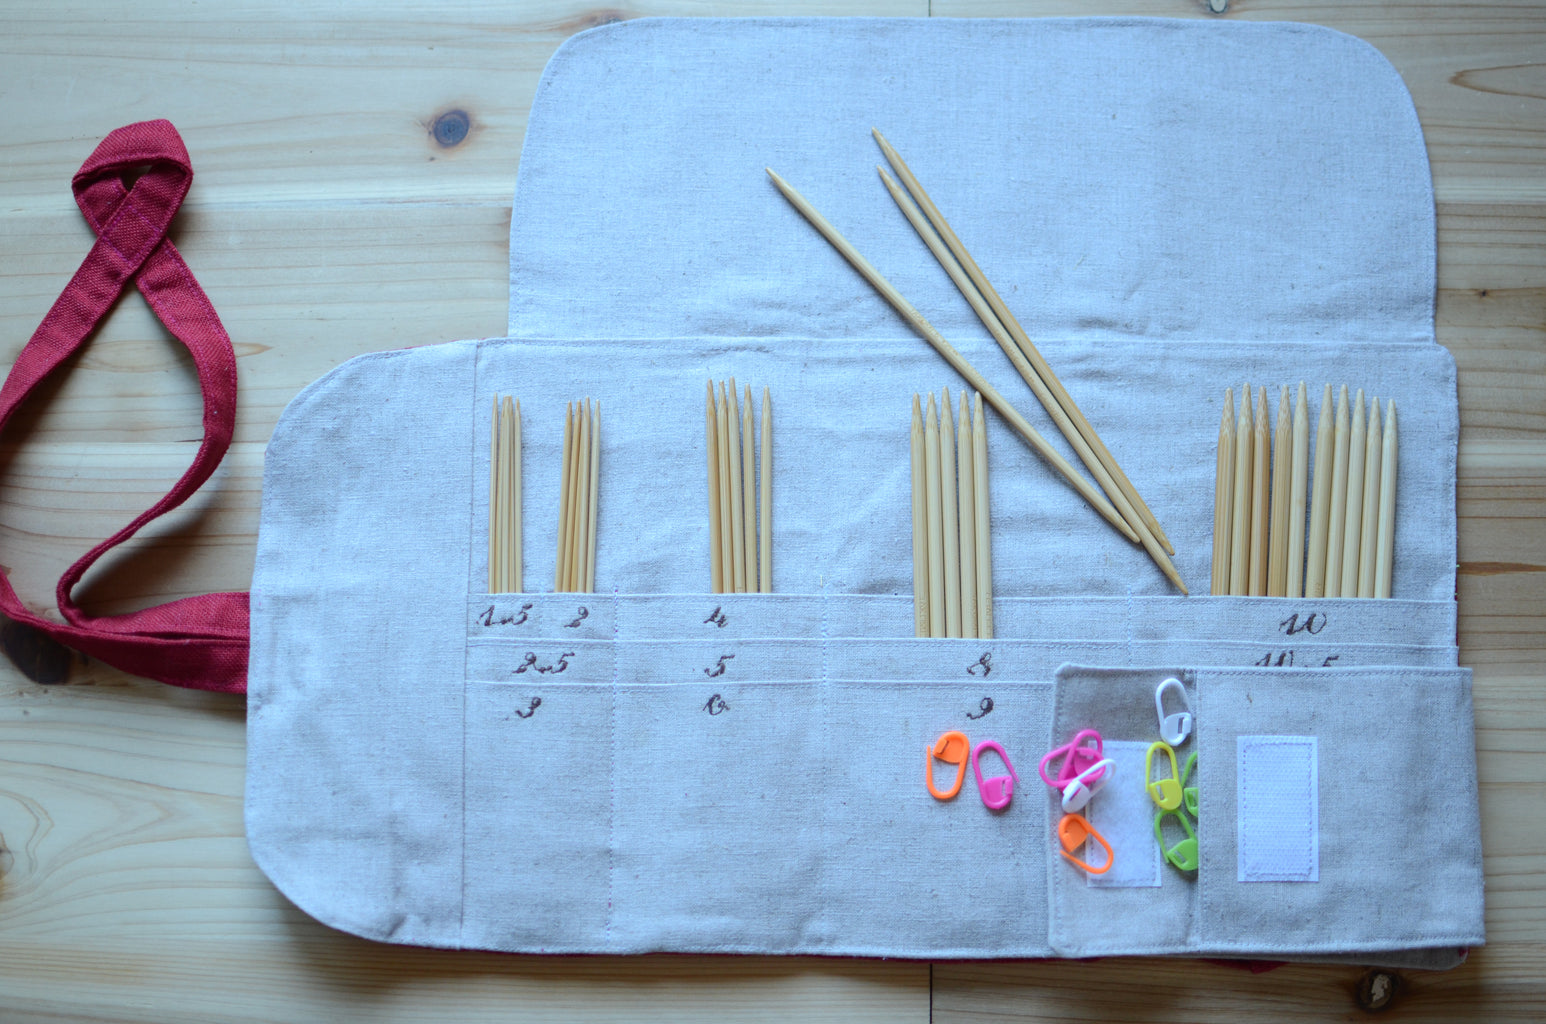 Interchangeable knitting needle storage with a zipper pocket